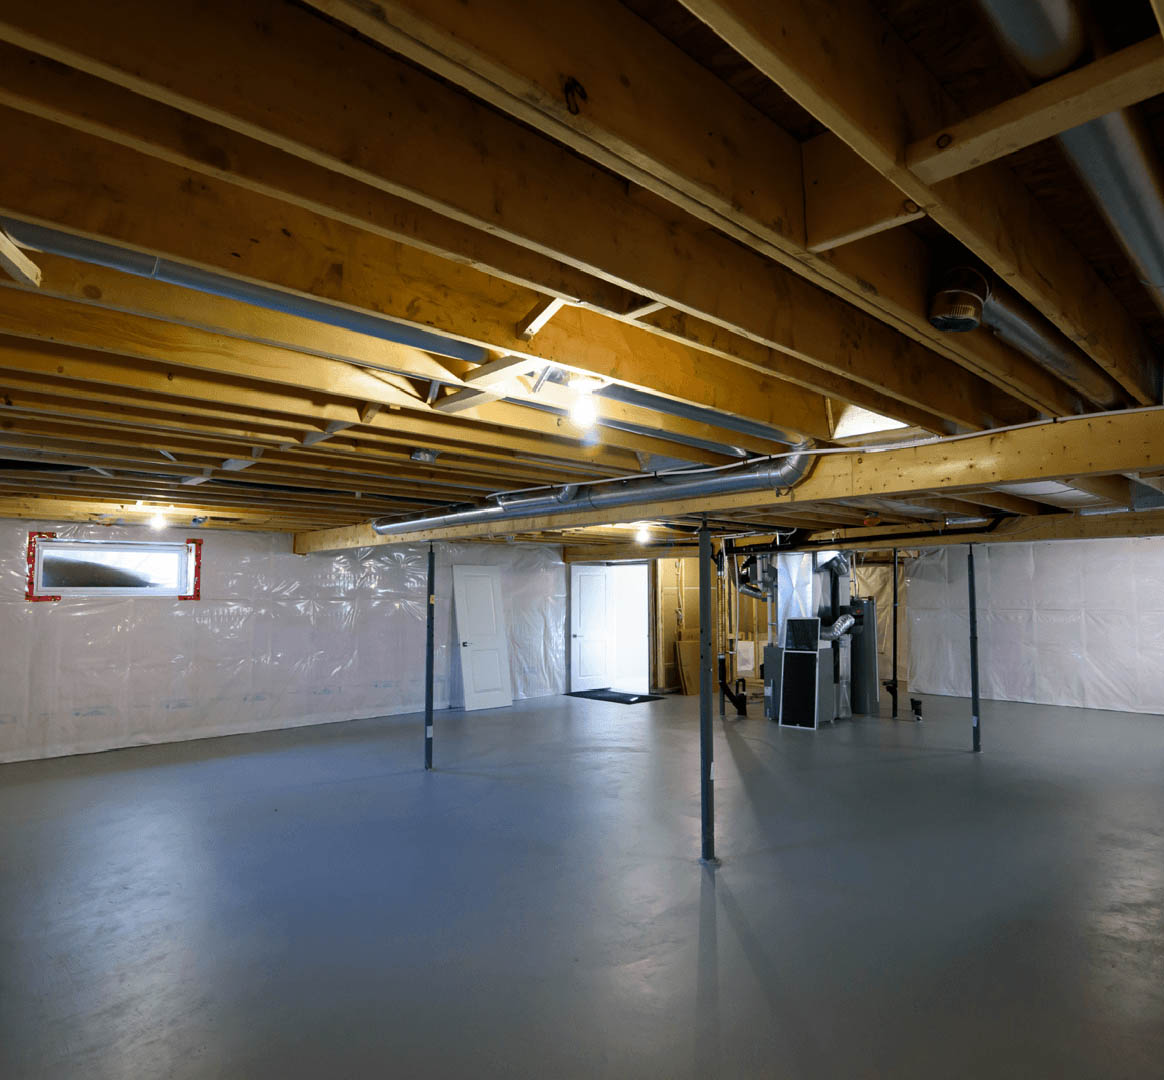 What You Need to Know About Finishing Your Basement Unfinished Image